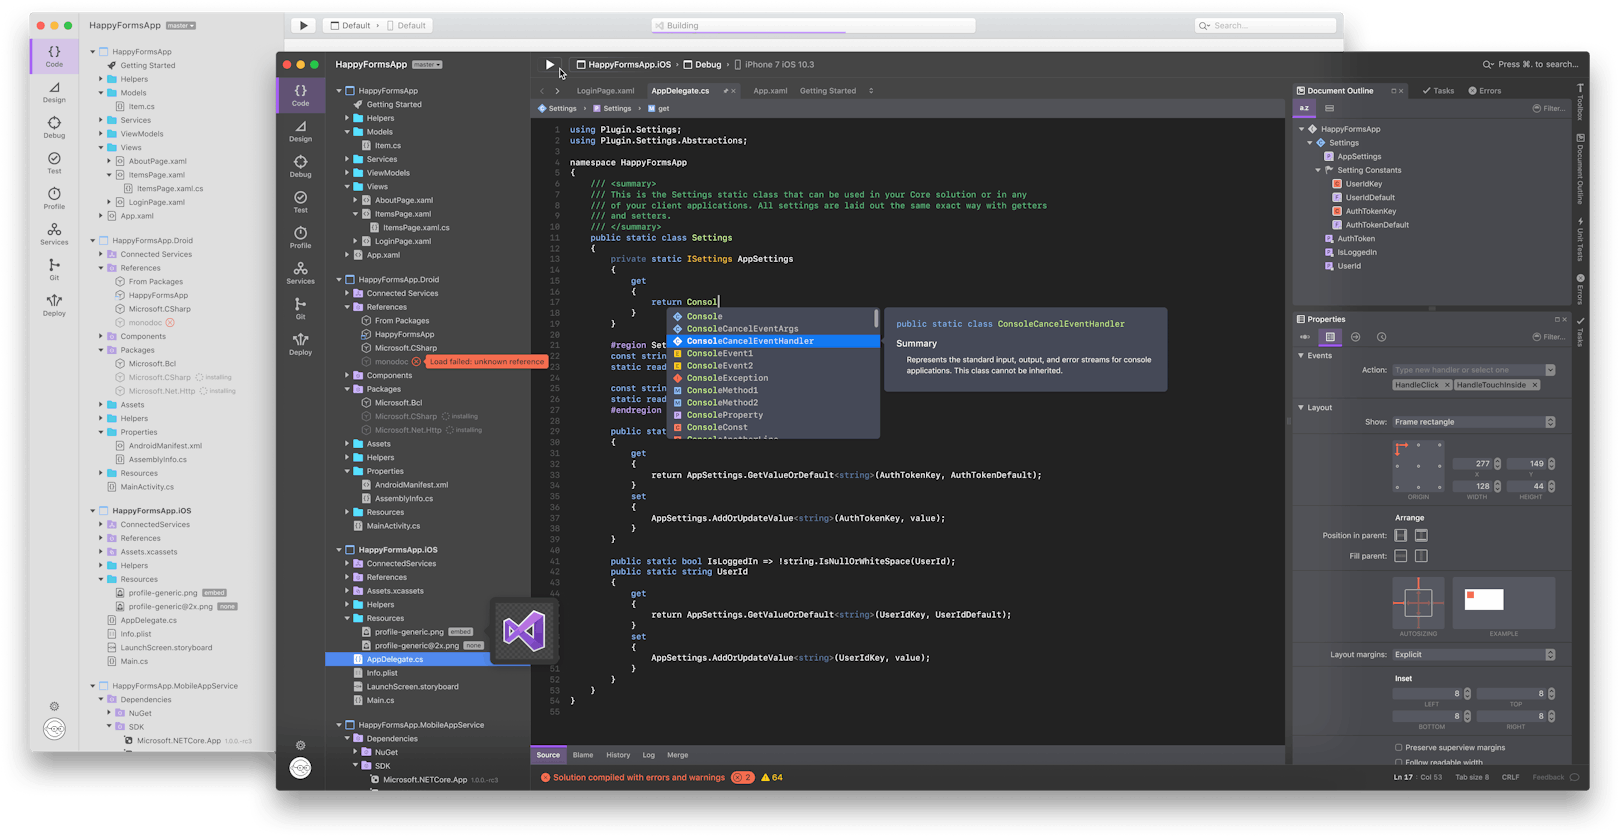 Screenshot of Visual Studio for Mac with code, Solution Explorer, Debug Console, and Property Tool Window, showing a mobile application development workspace with an error notification and Code Editor open on C# settings file.